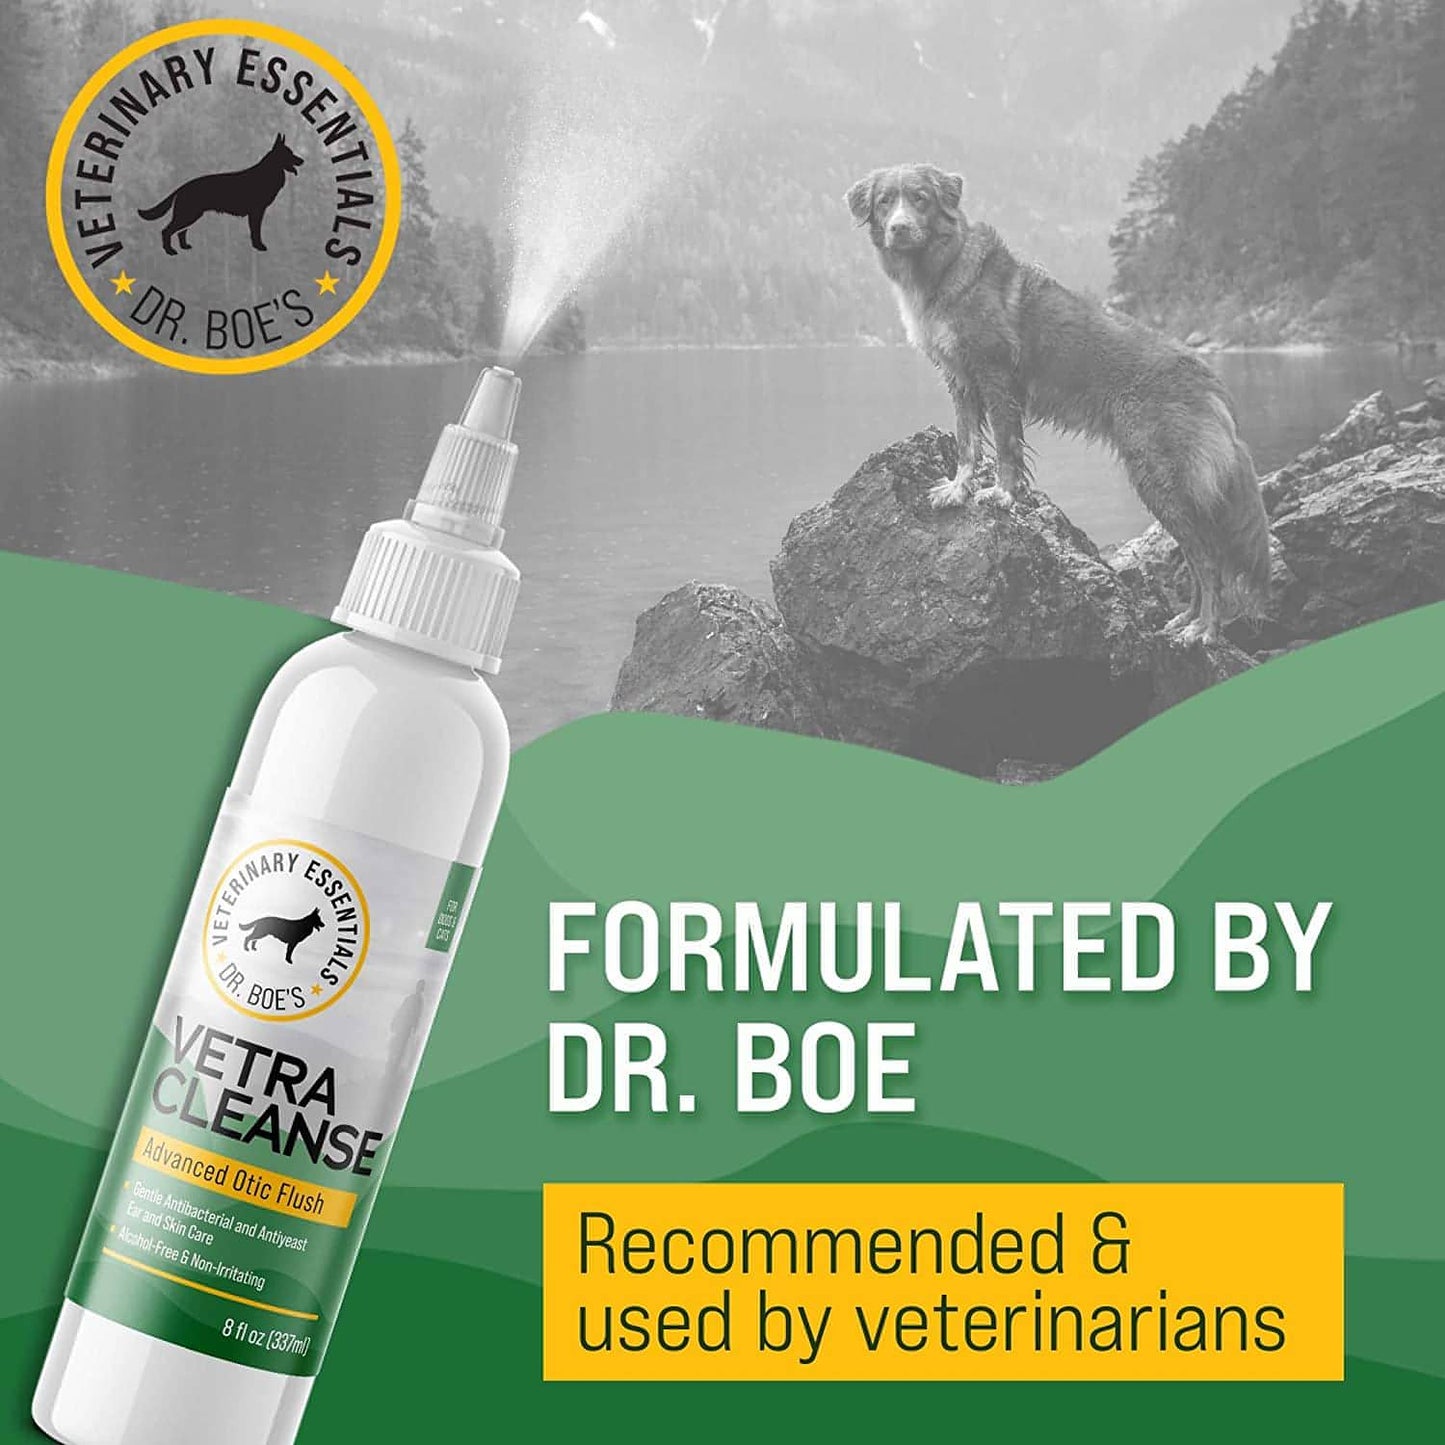 VetraCleanse Advanced Otic Flush - Dog and Cat Ear Cleanser